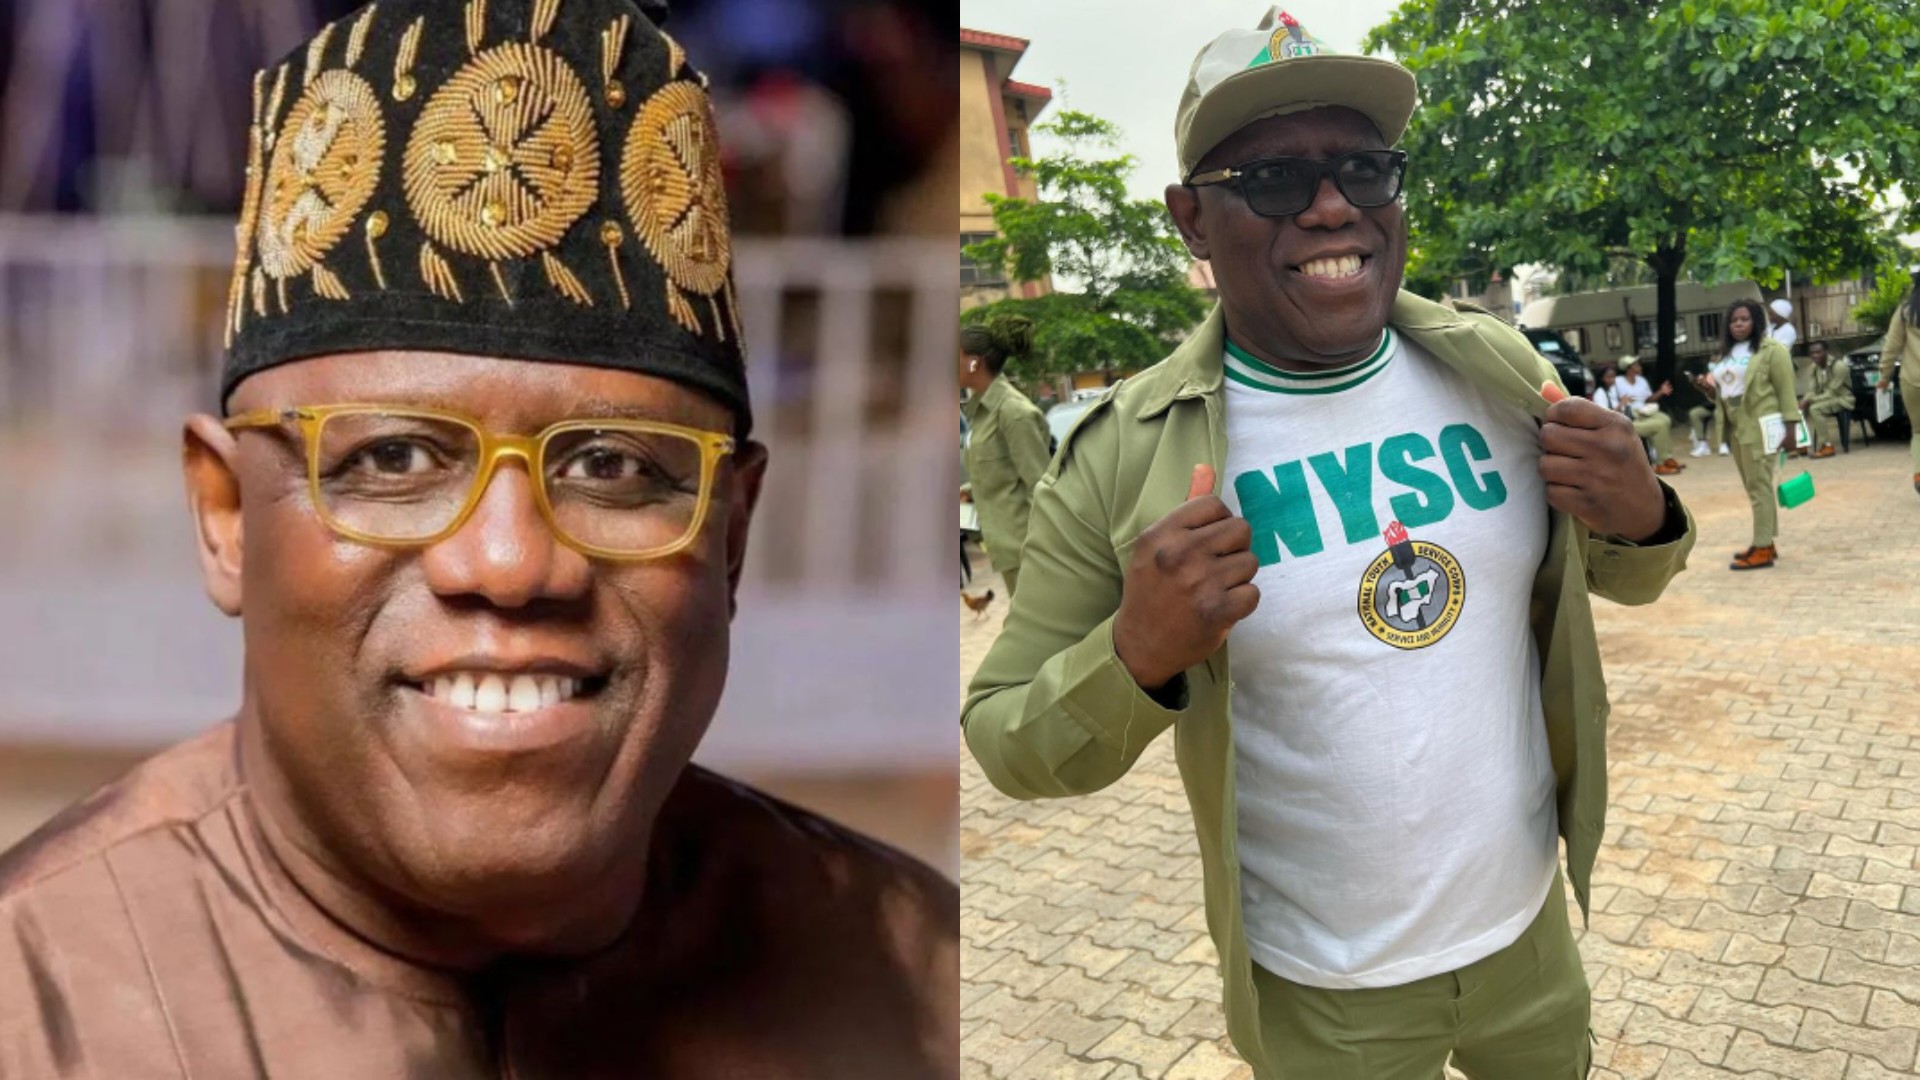 “Baba wan run for office”, reactions as 53-year-old music executive Kenny Ogungbe completes NYSC